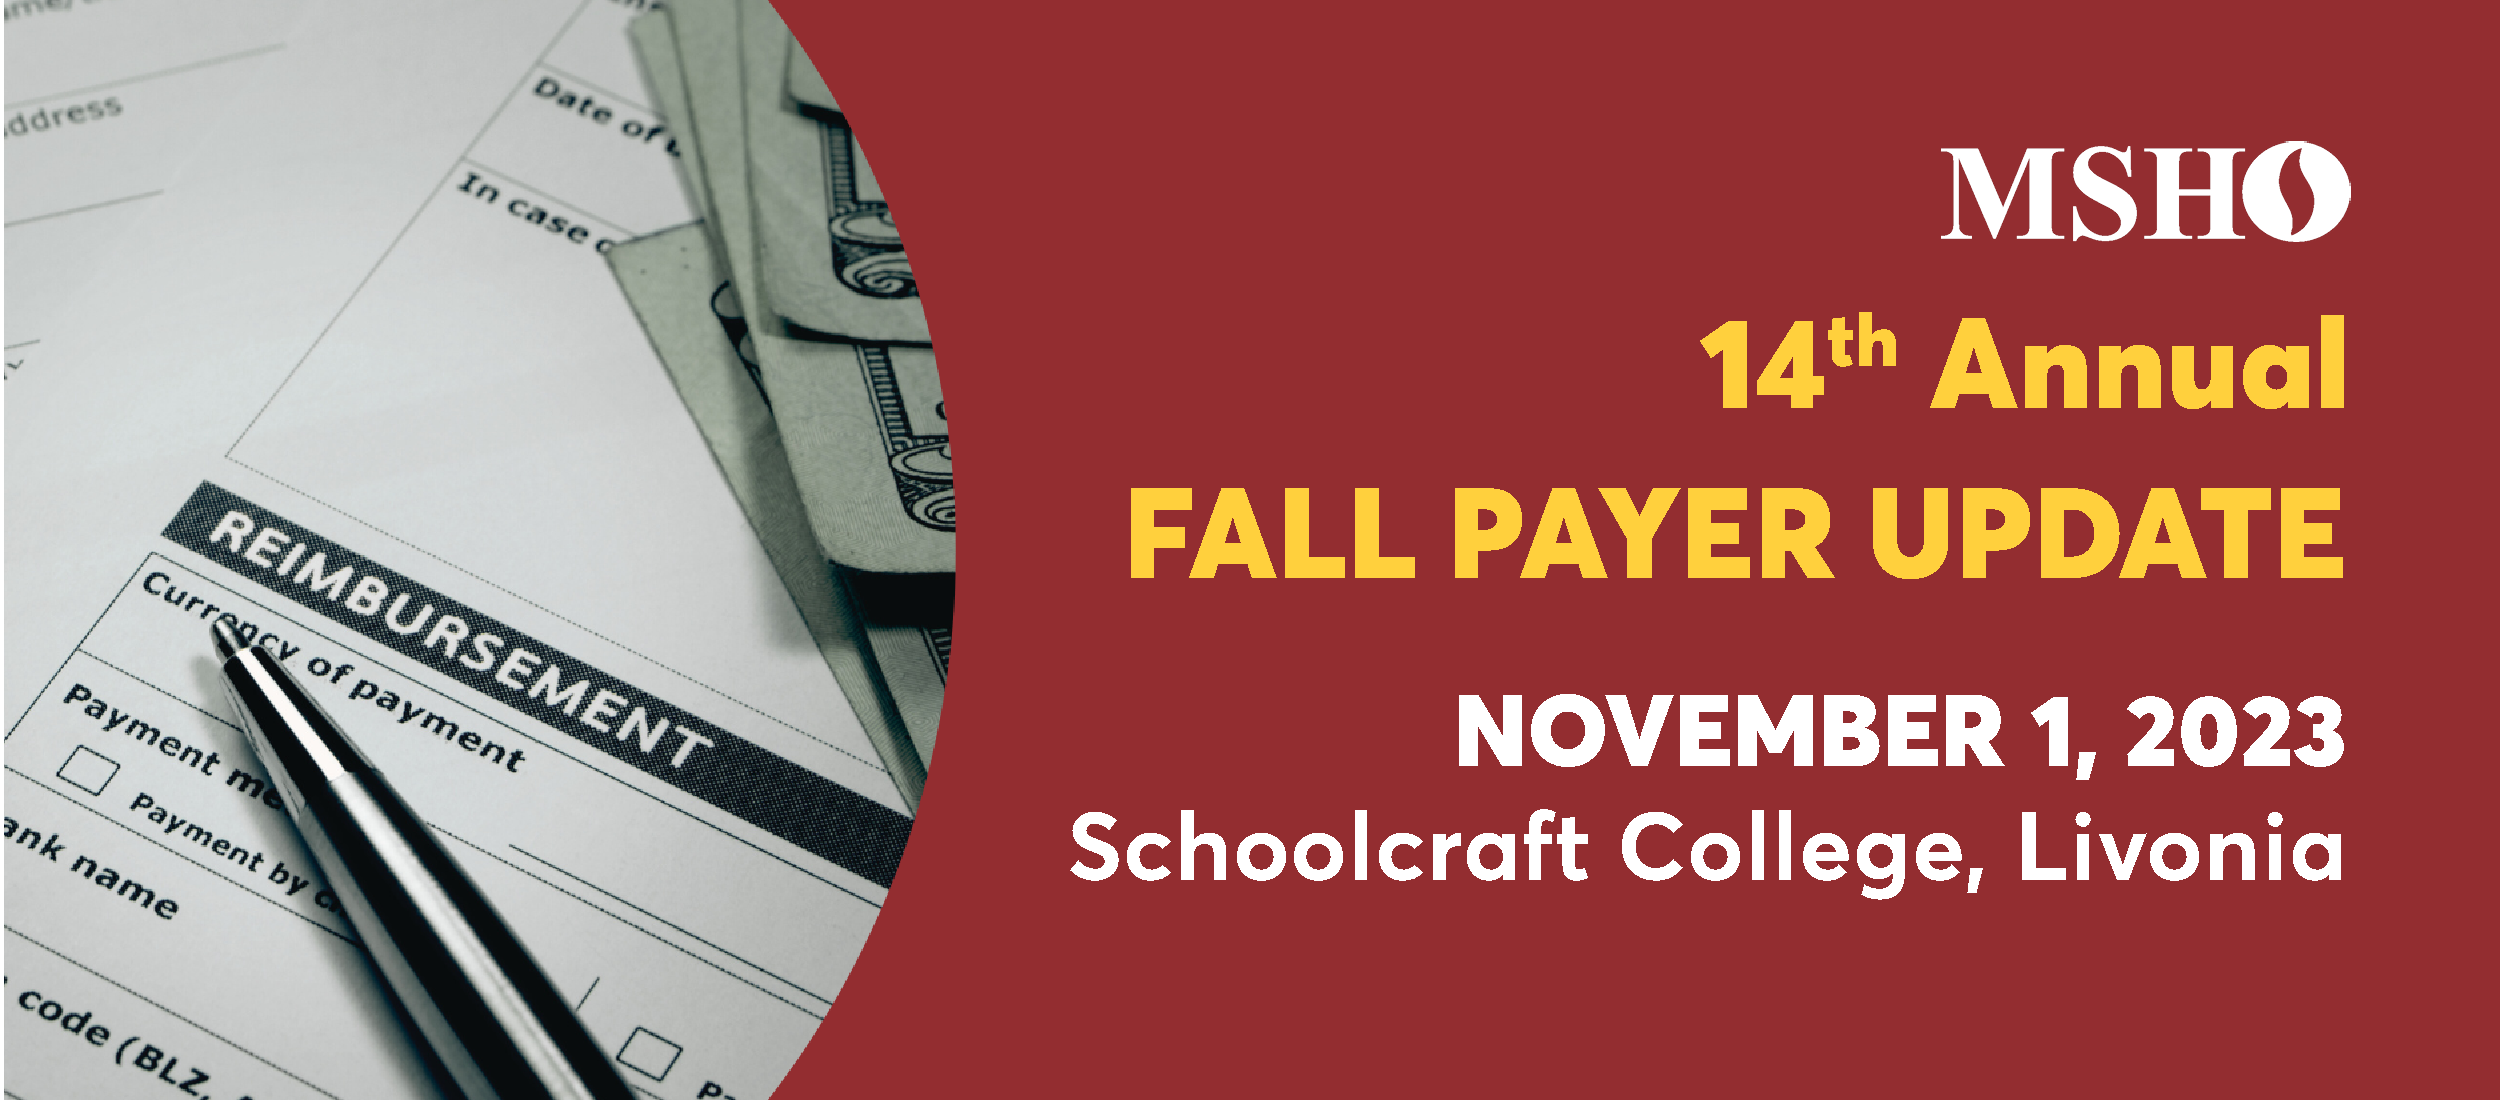 MSHO 14th Annual Fall Payer Update